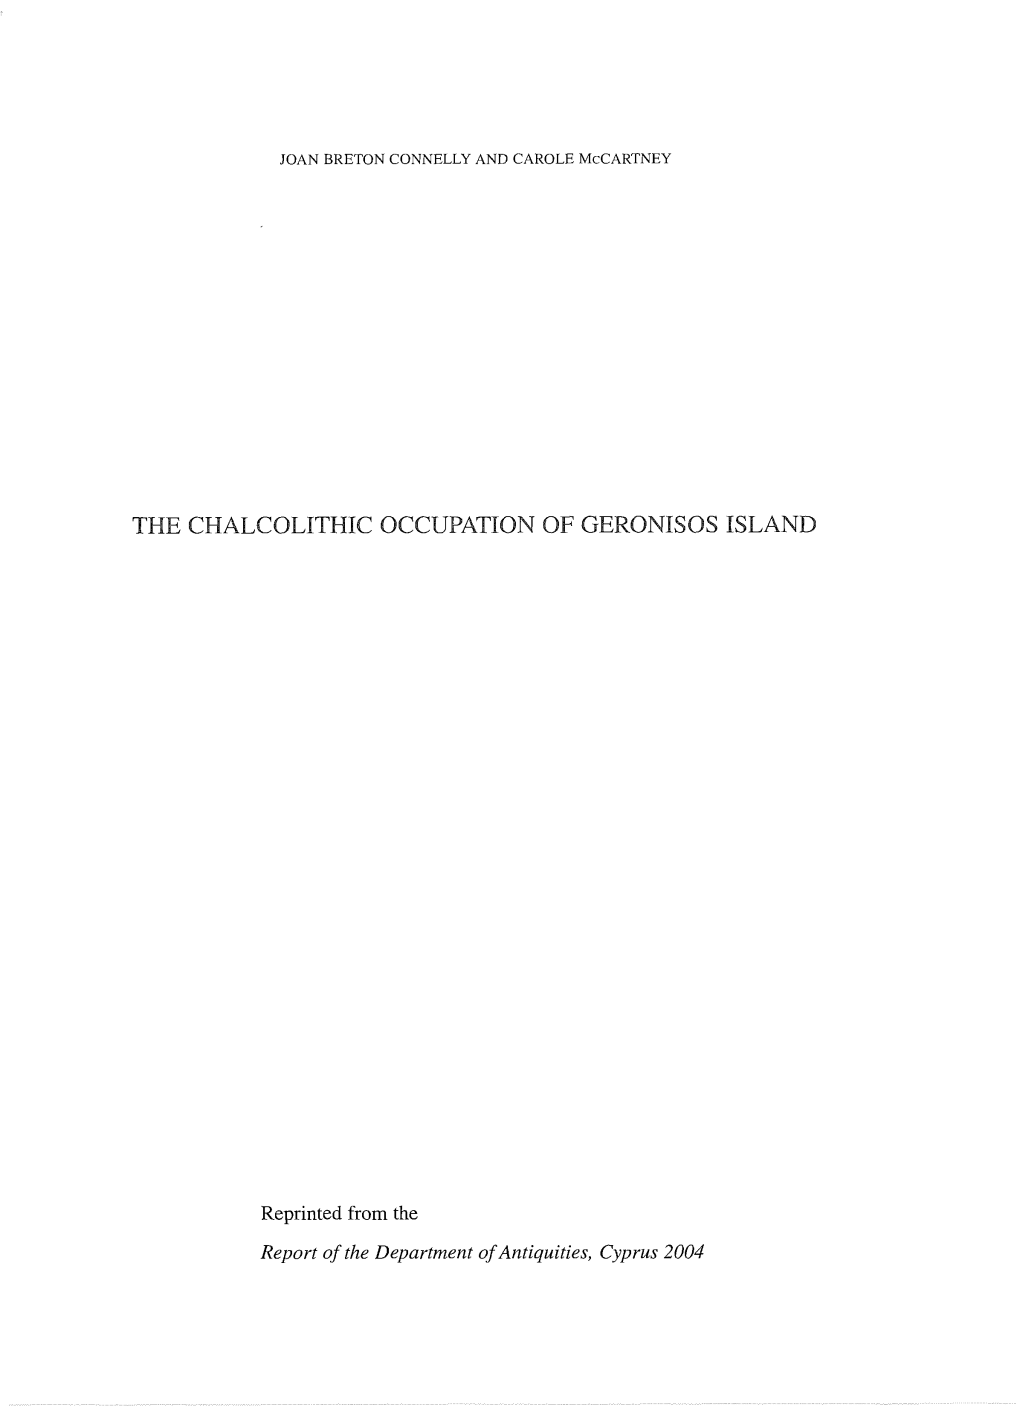 Reprinted from the Report of the Department of Antiquities, Cyprus 2004 Halcolithic Ation of Geronisos